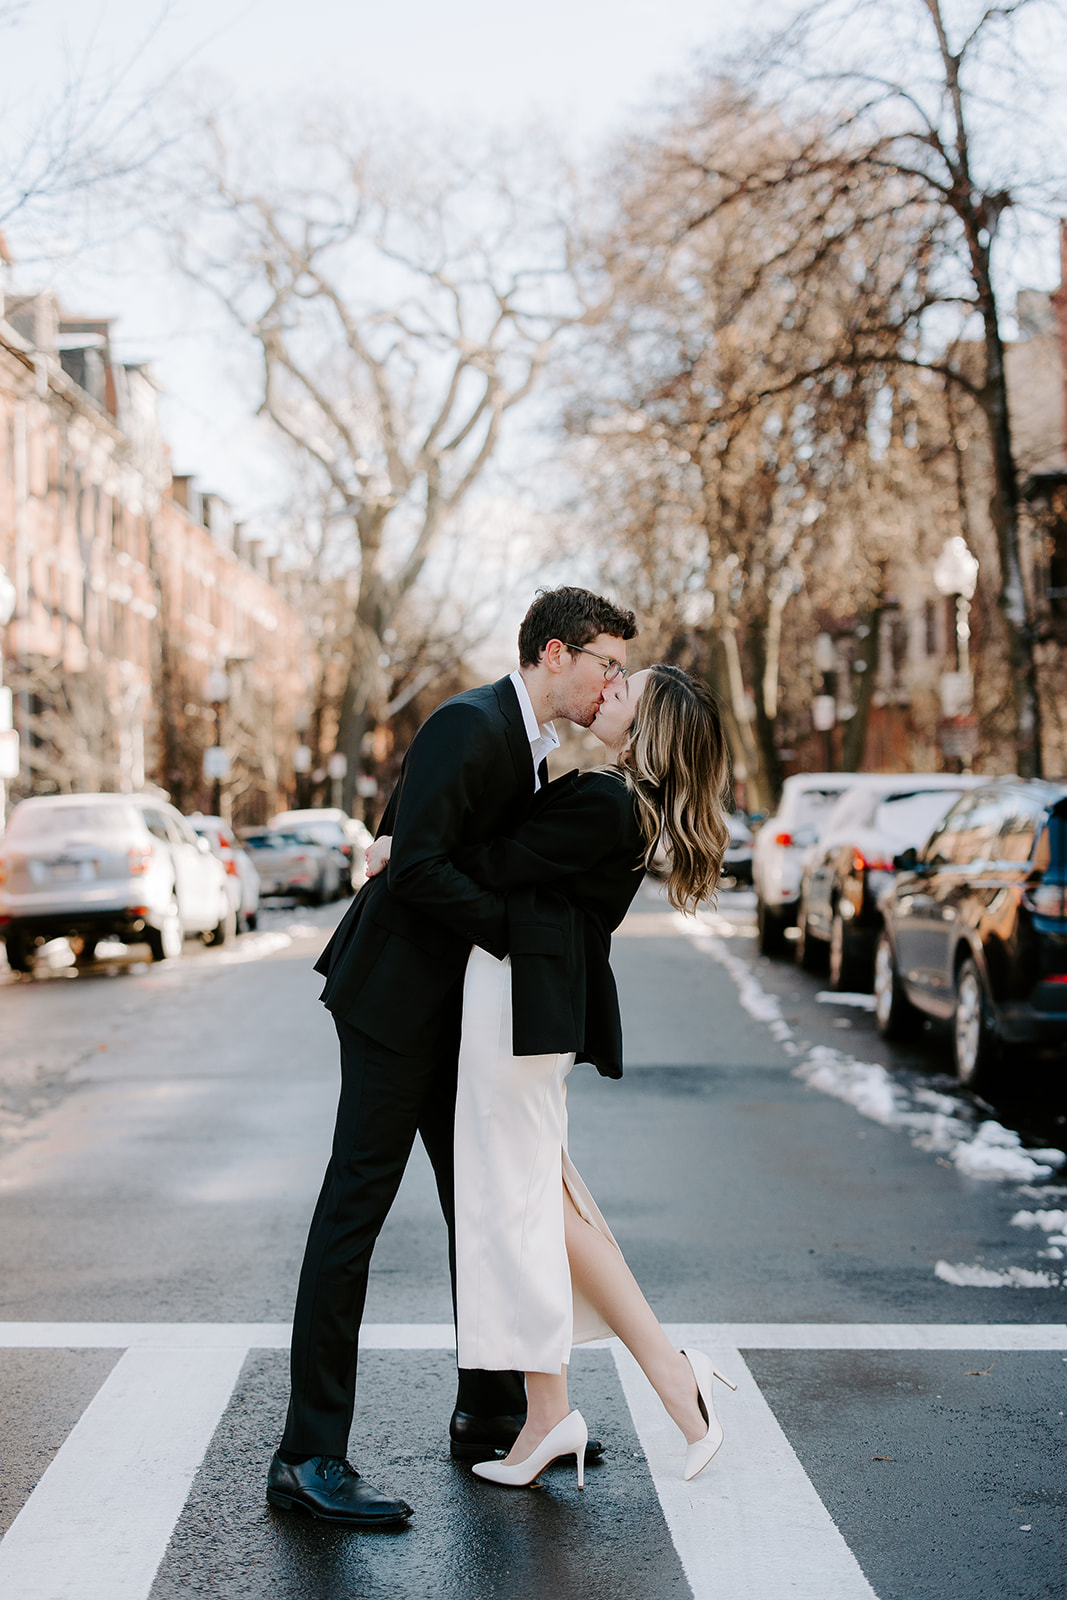 Stunning bride and groom pose together in Boston after their dreamy winter elopement at the Boston Public Library!